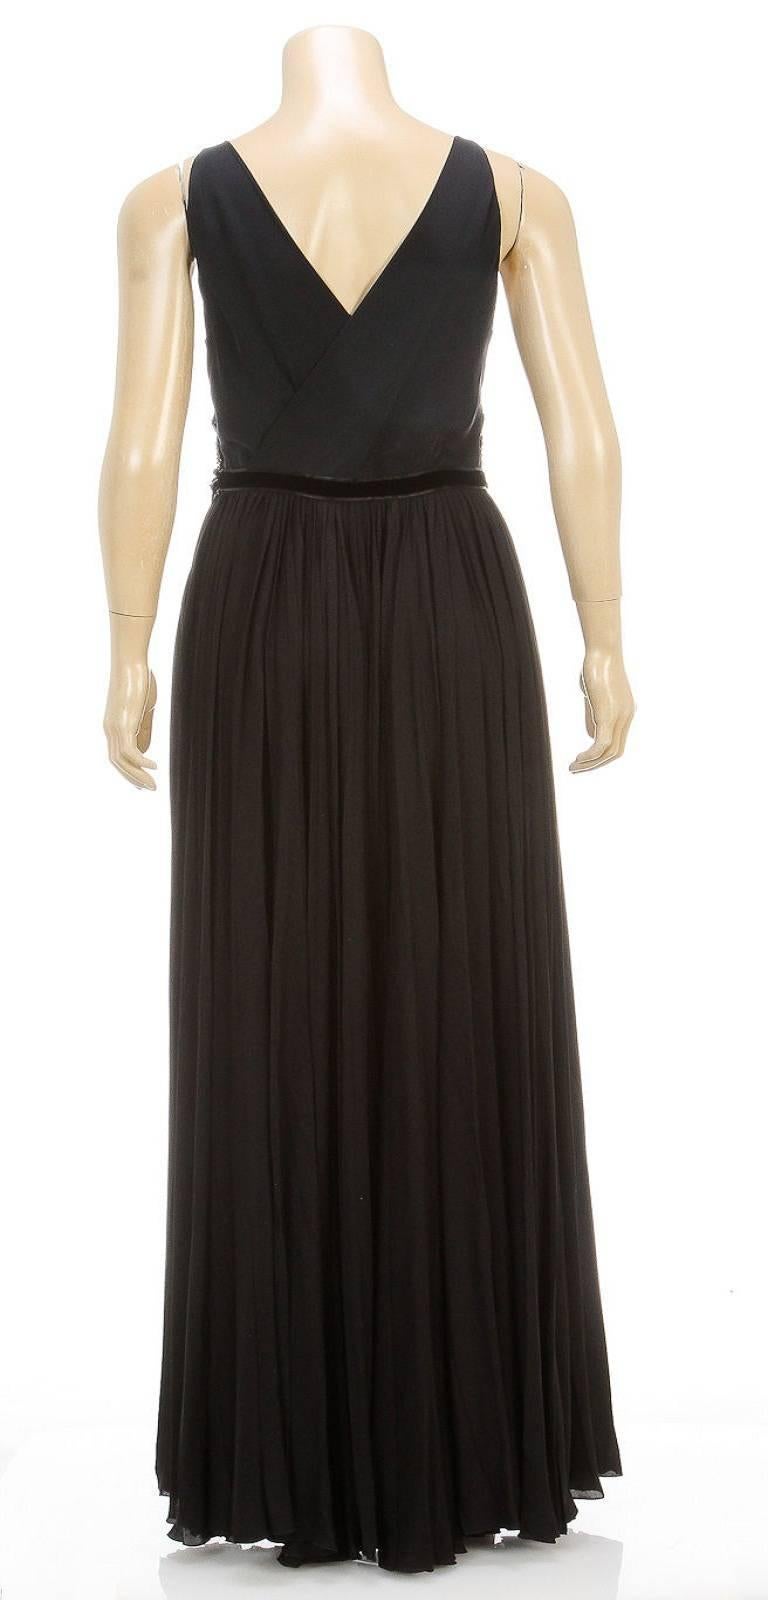 Women's Gucci Black Sleeveless Butterfly Embellished Empire Waist Gown (Size 40) For Sale